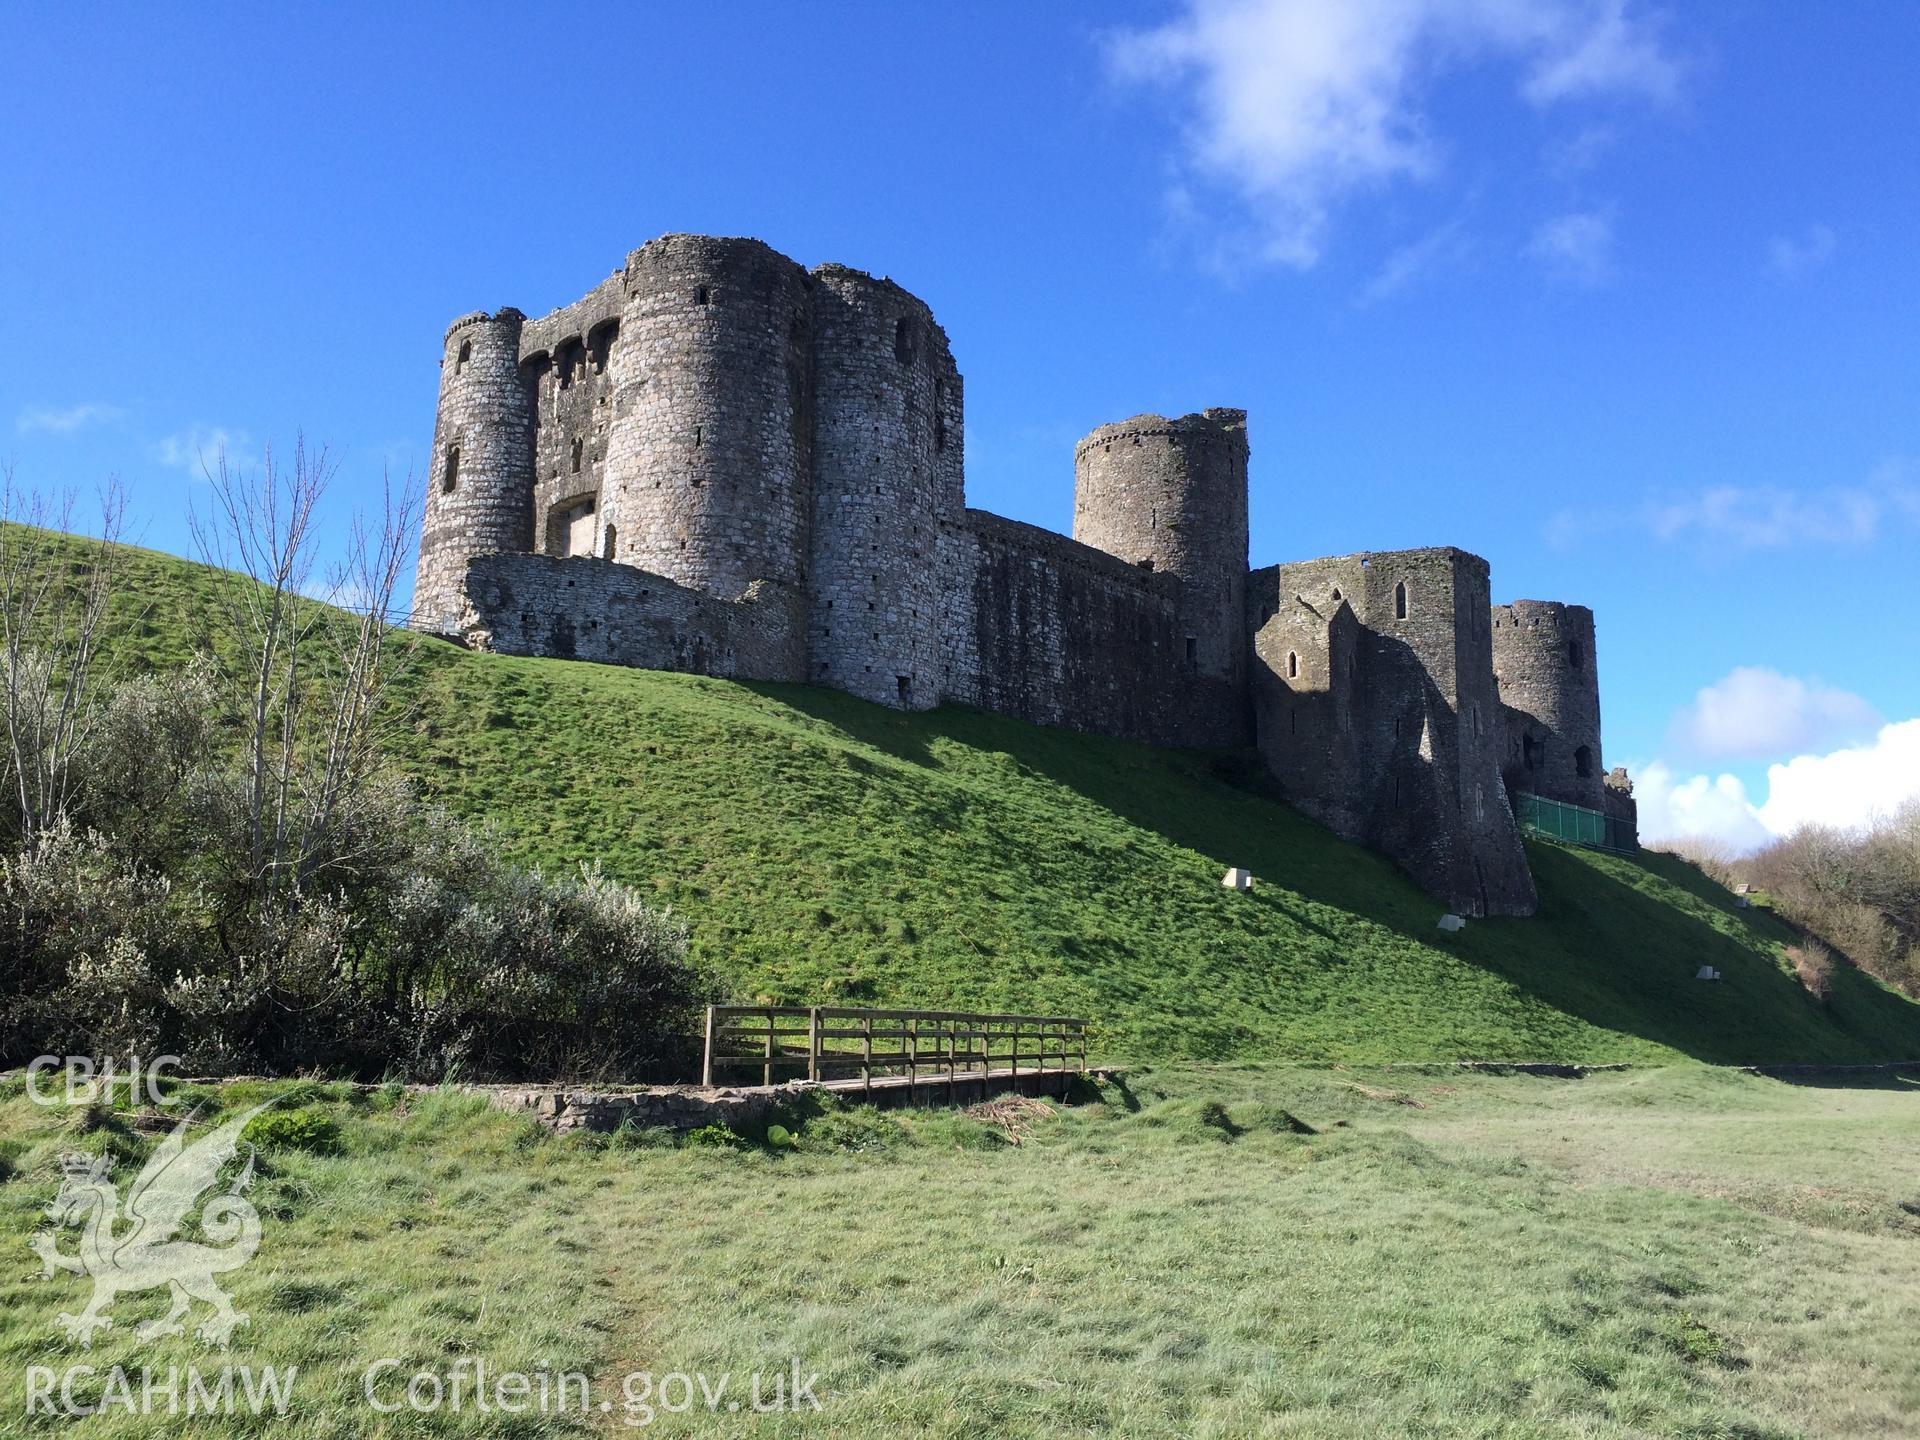 Colour photo showing Kidwelly Castle, produced by Paul R. Davis,  9th April 2016.